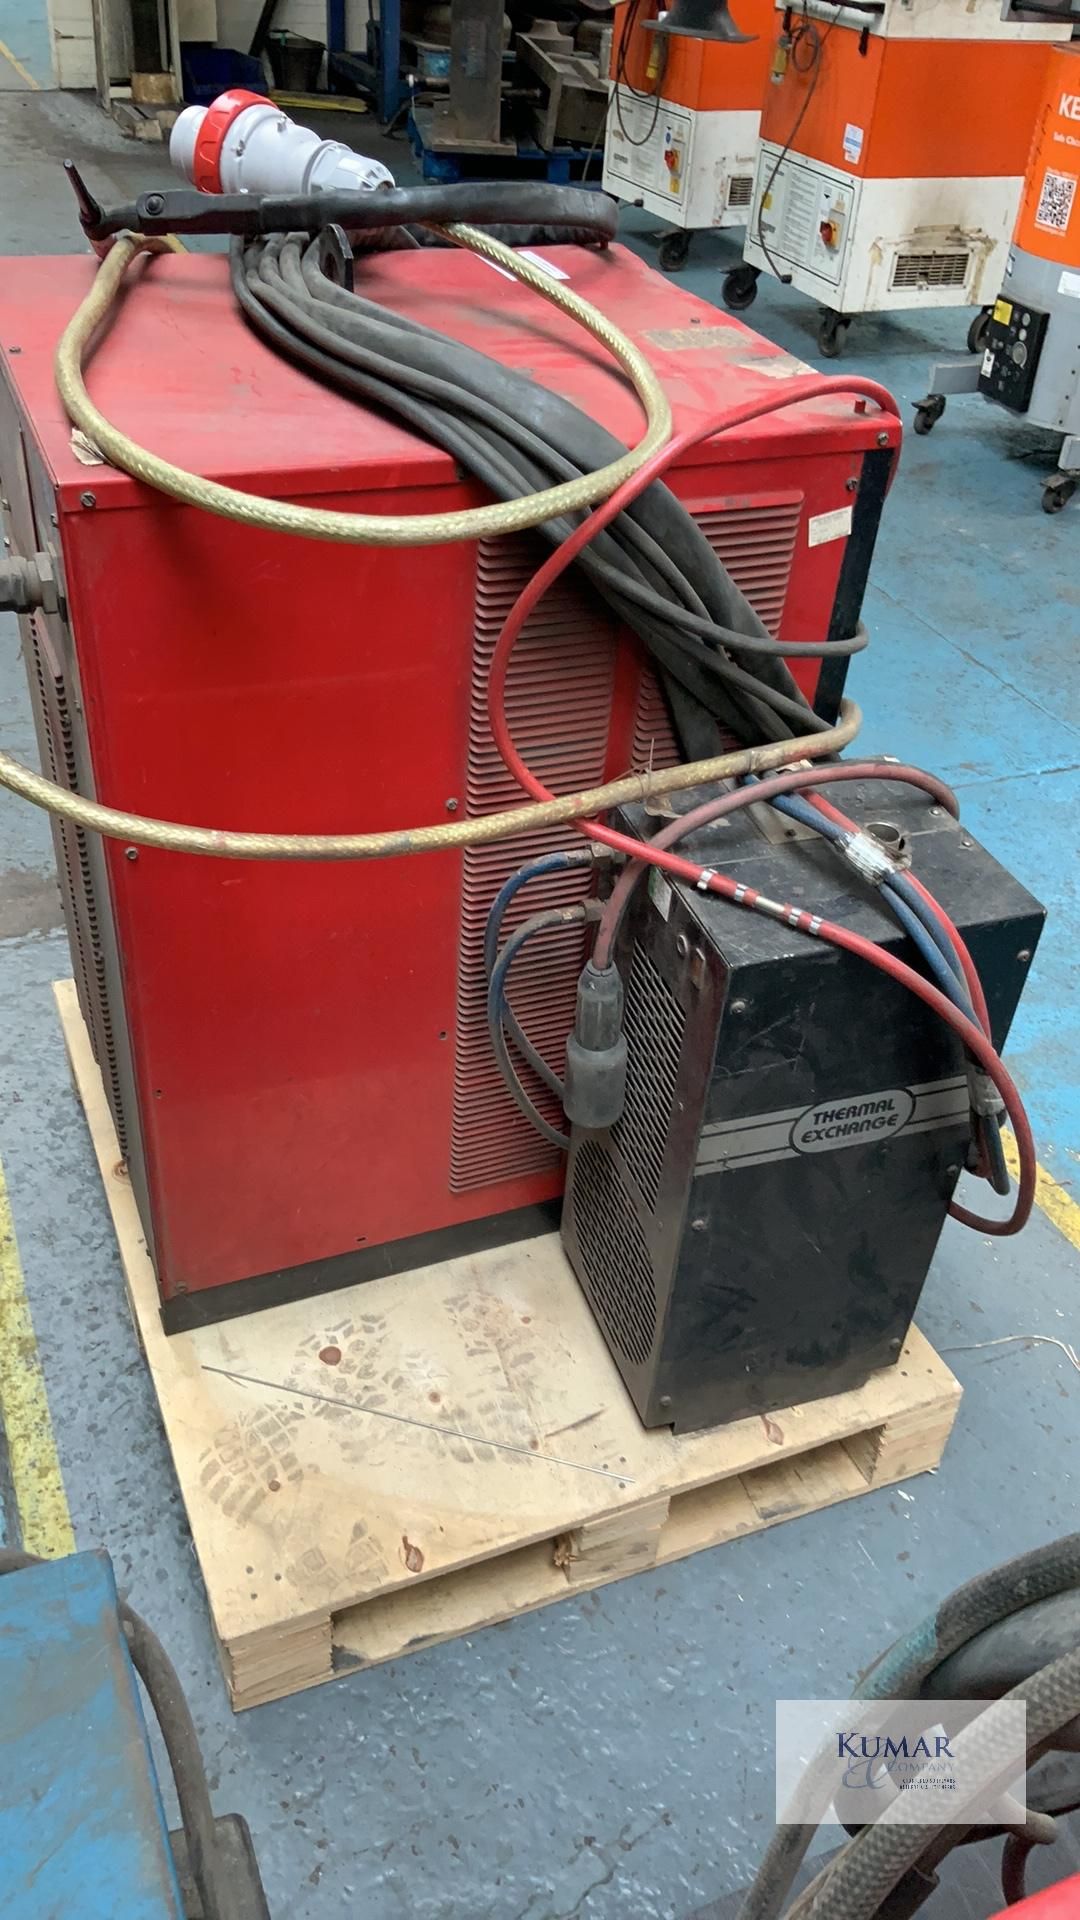 Lincoln Electric Tig 355 Square Wave AC/DC Tig & Stick ArcWelding Power Source, Serial No. - Image 10 of 11